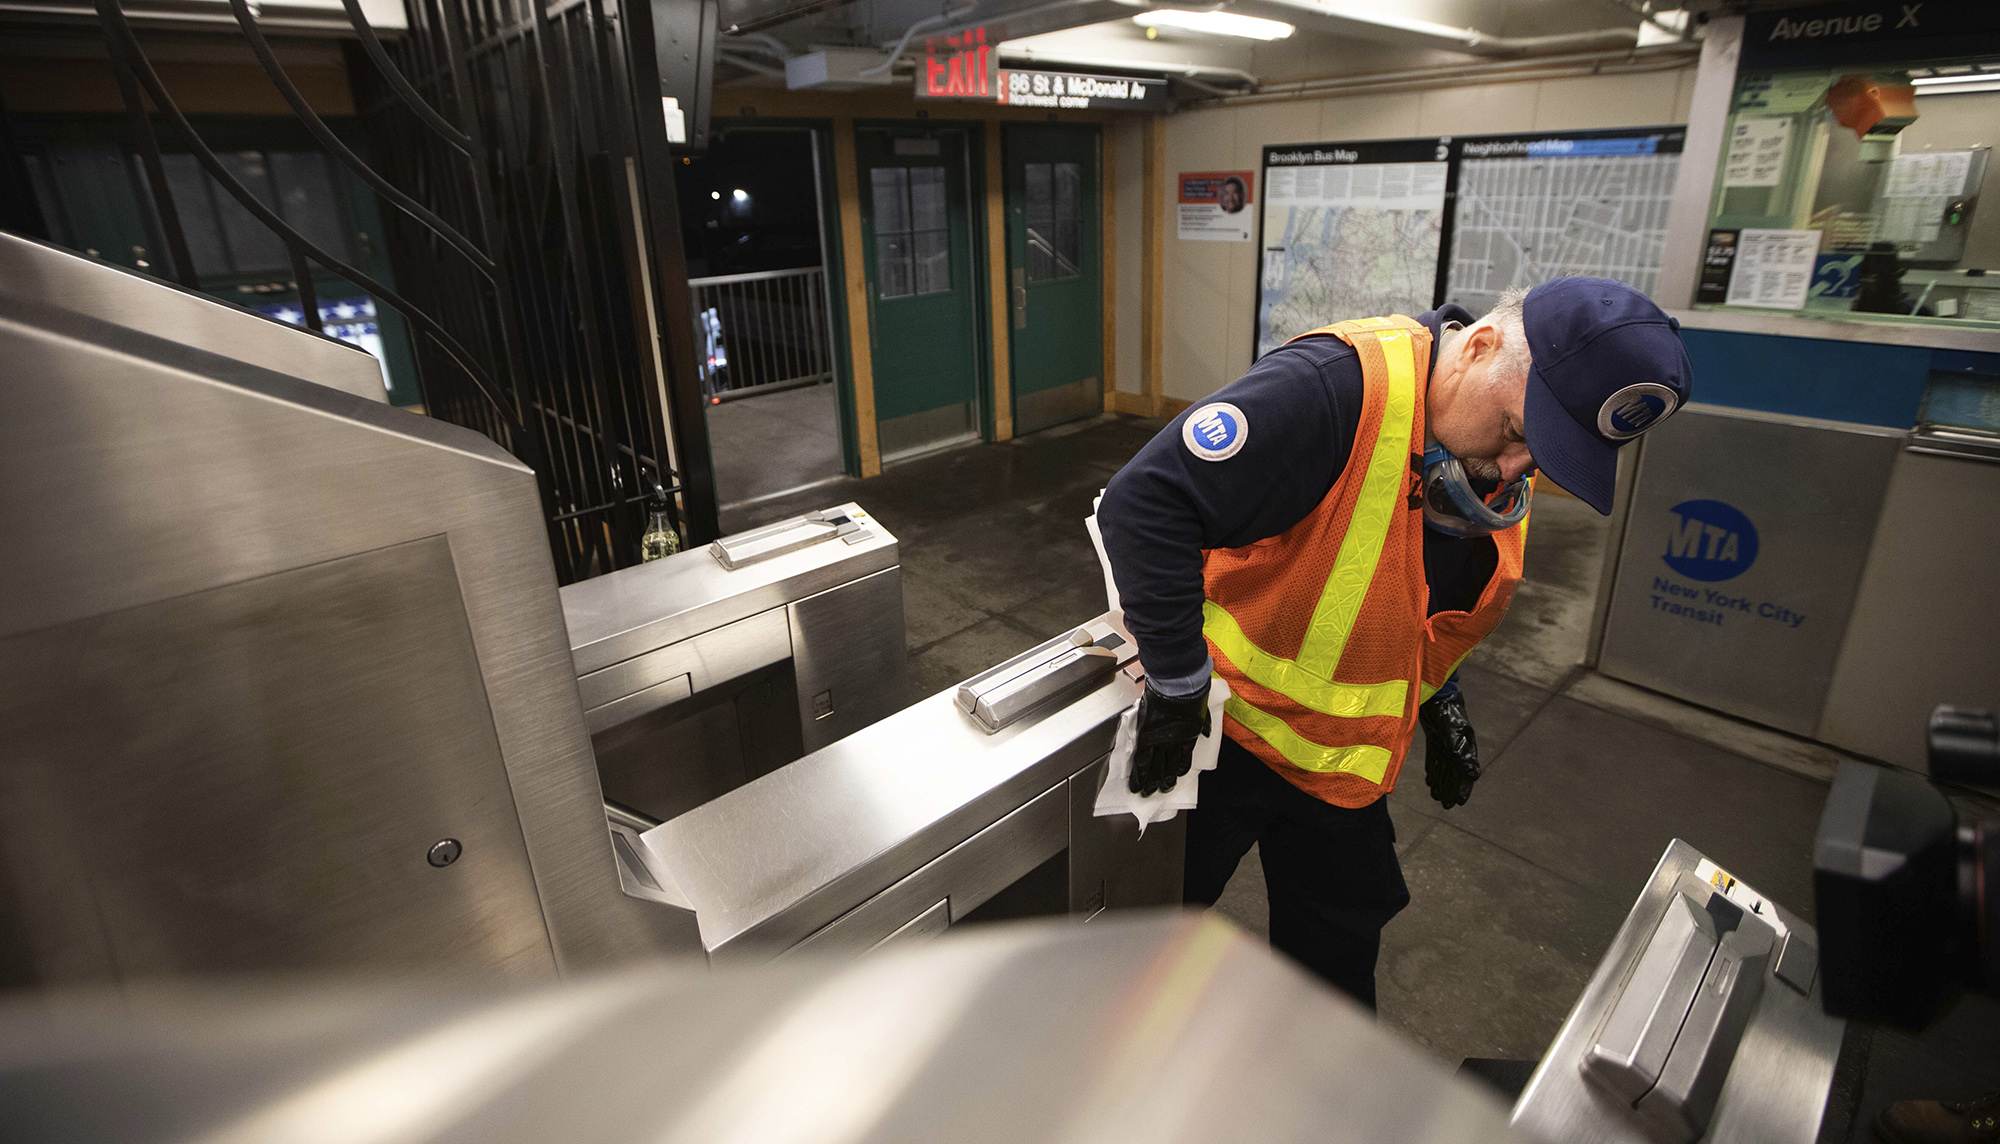 A Metropolitan Transportation Authority worker sanitizes surfaces at the Avenue X subway station in the Brooklyn borough of New York.